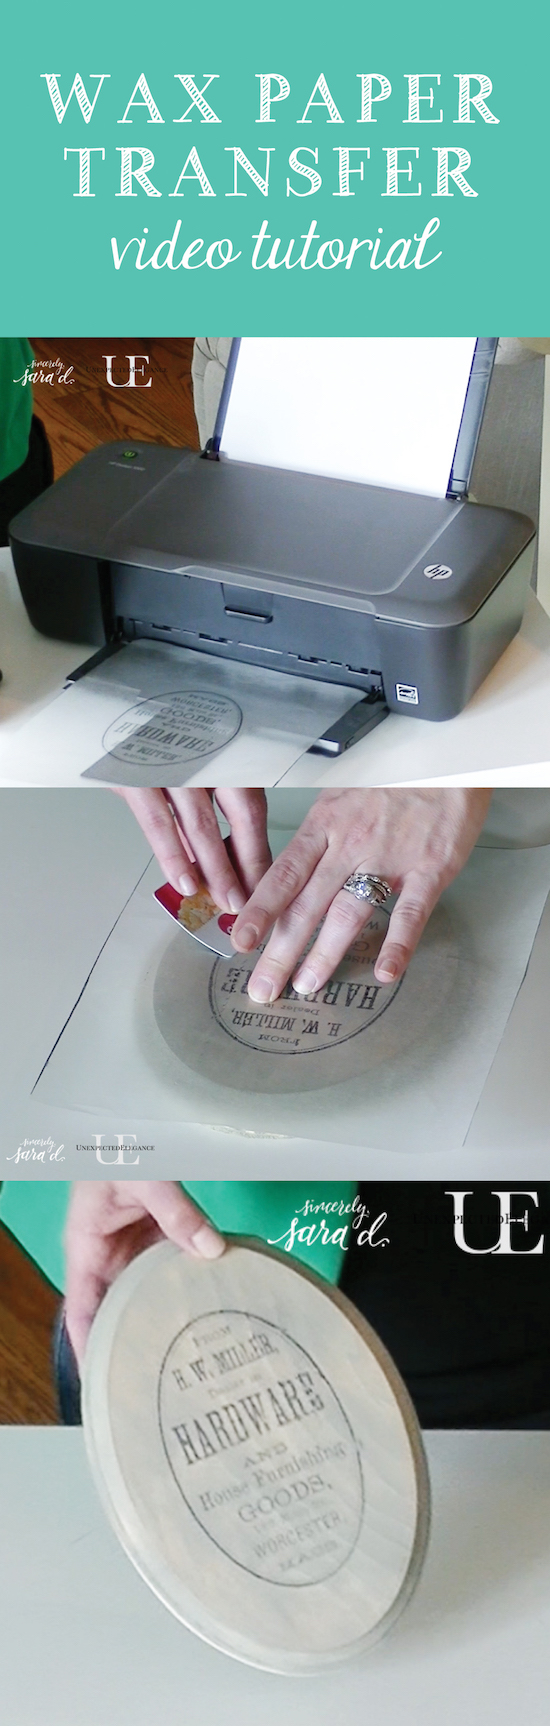 Have you been looking for an inexpensive way to transfer an image?!? Check out this great WAX PAPER IMAGE TRANSFER tutorial. The video helps with the all the details!